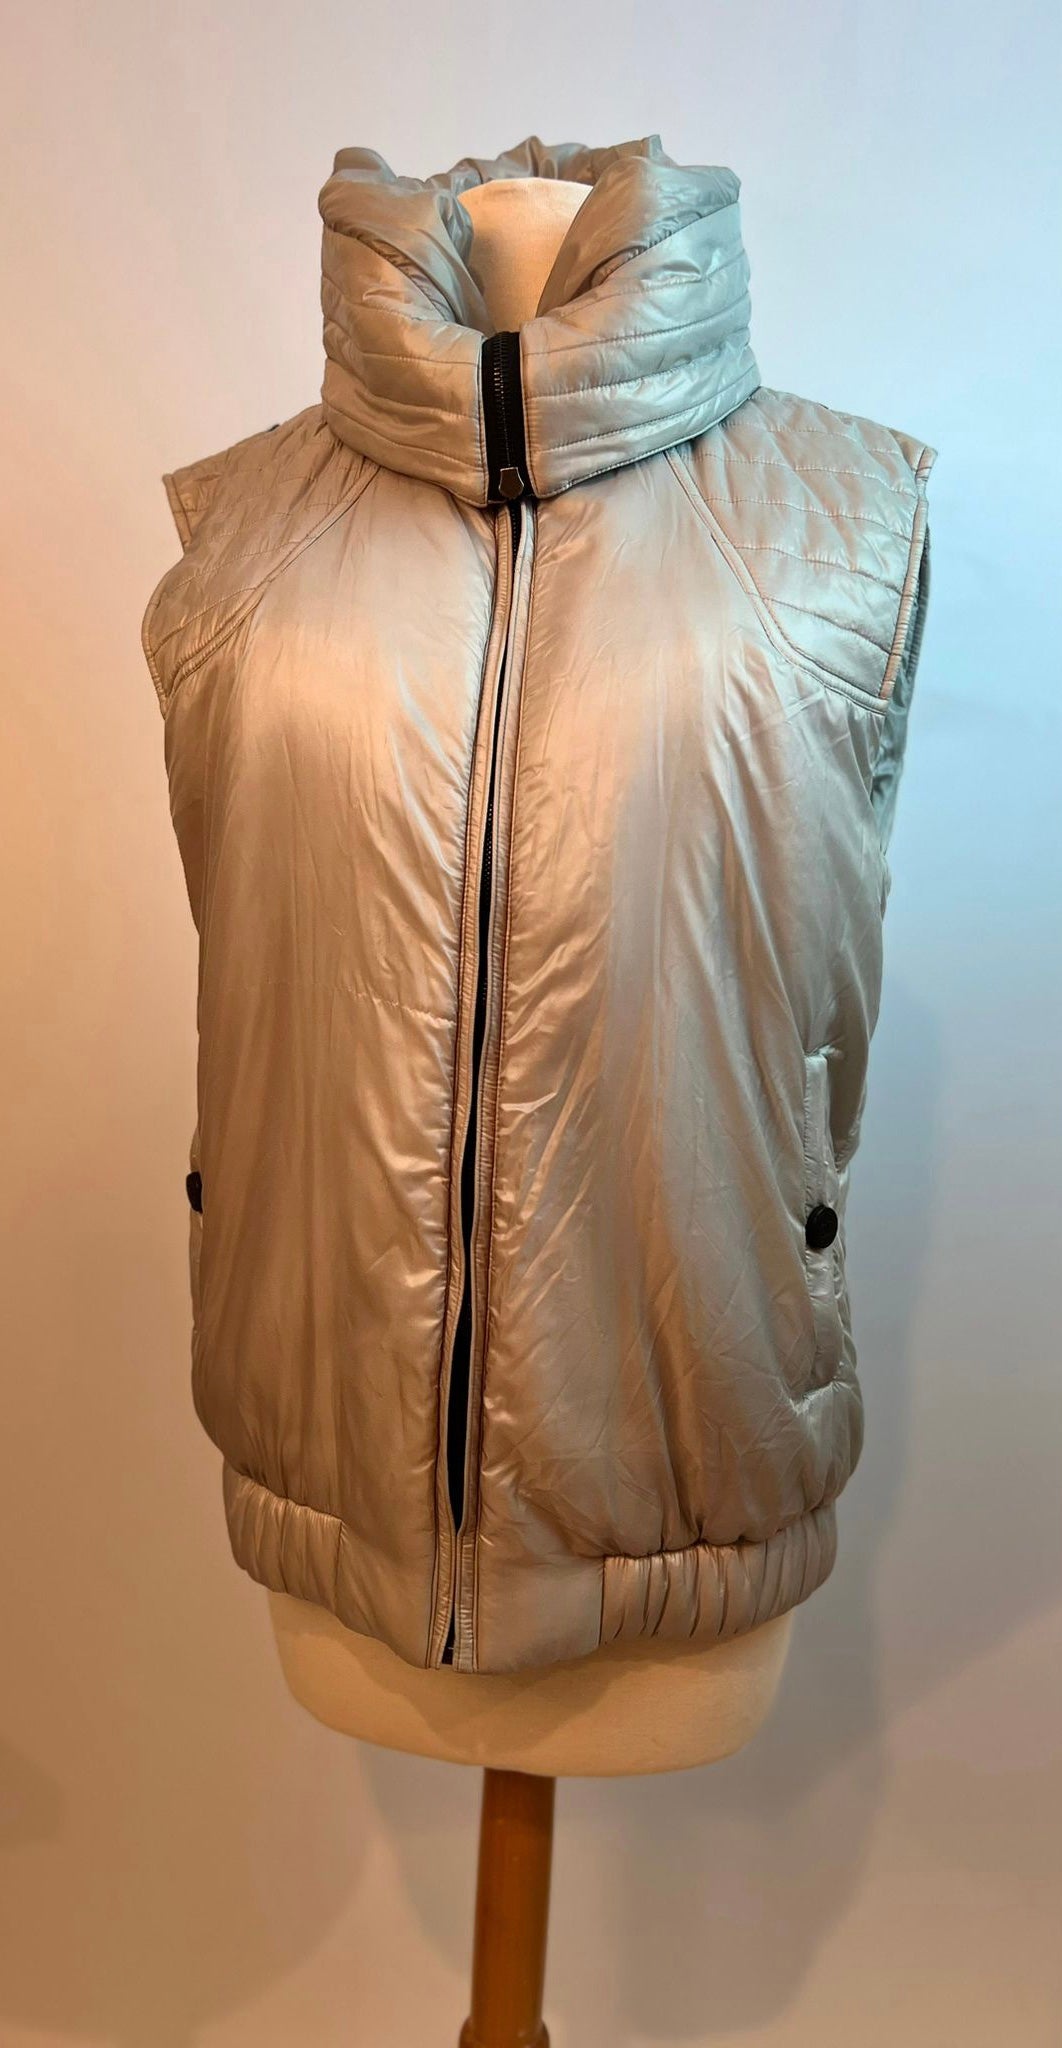 Chanel Silver Grey Zip Up Hooded Puffer Vest FR 42